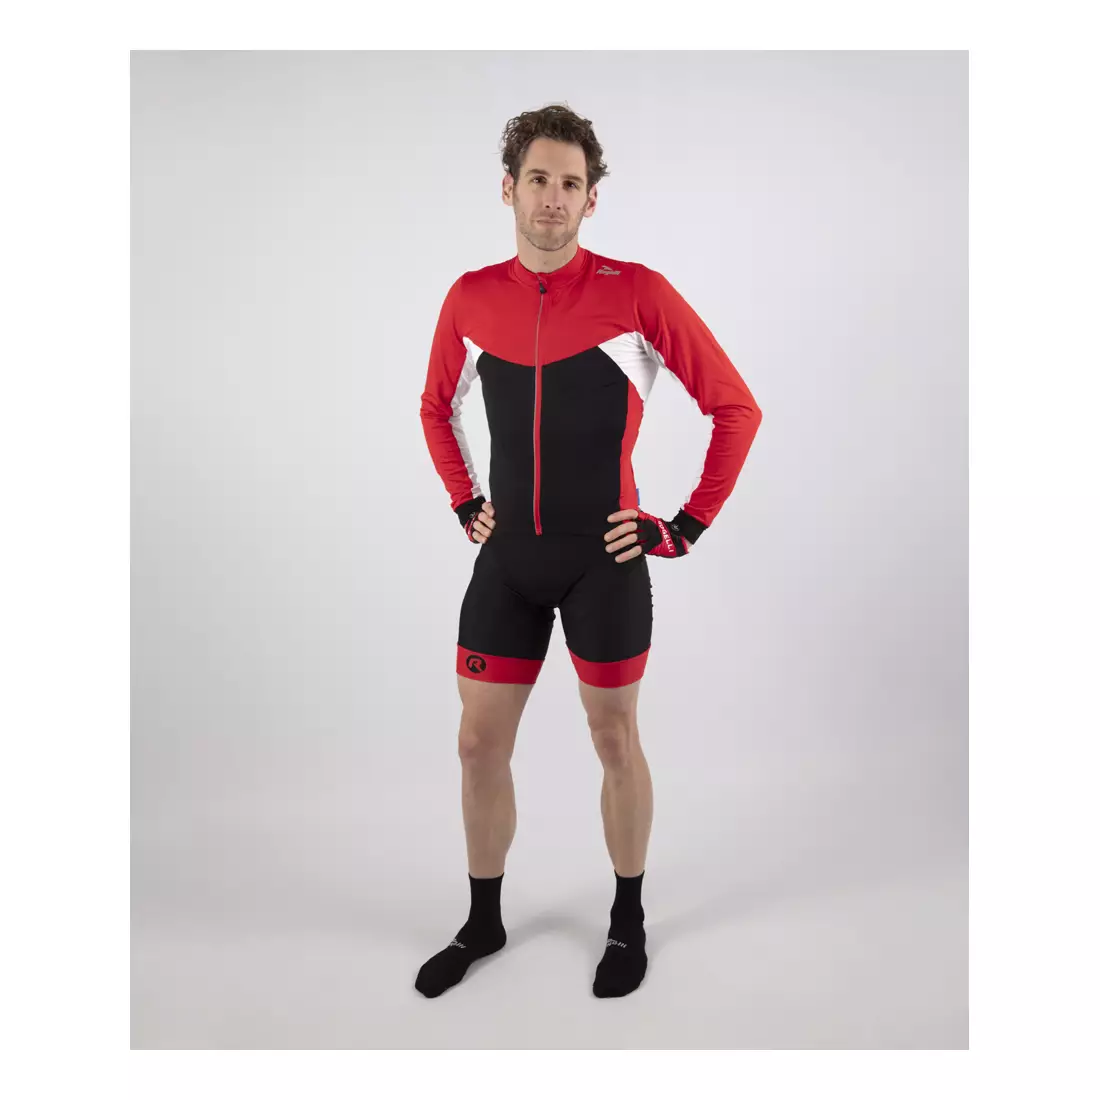 ROGELLI RAPID cycling shorts with braces black-red